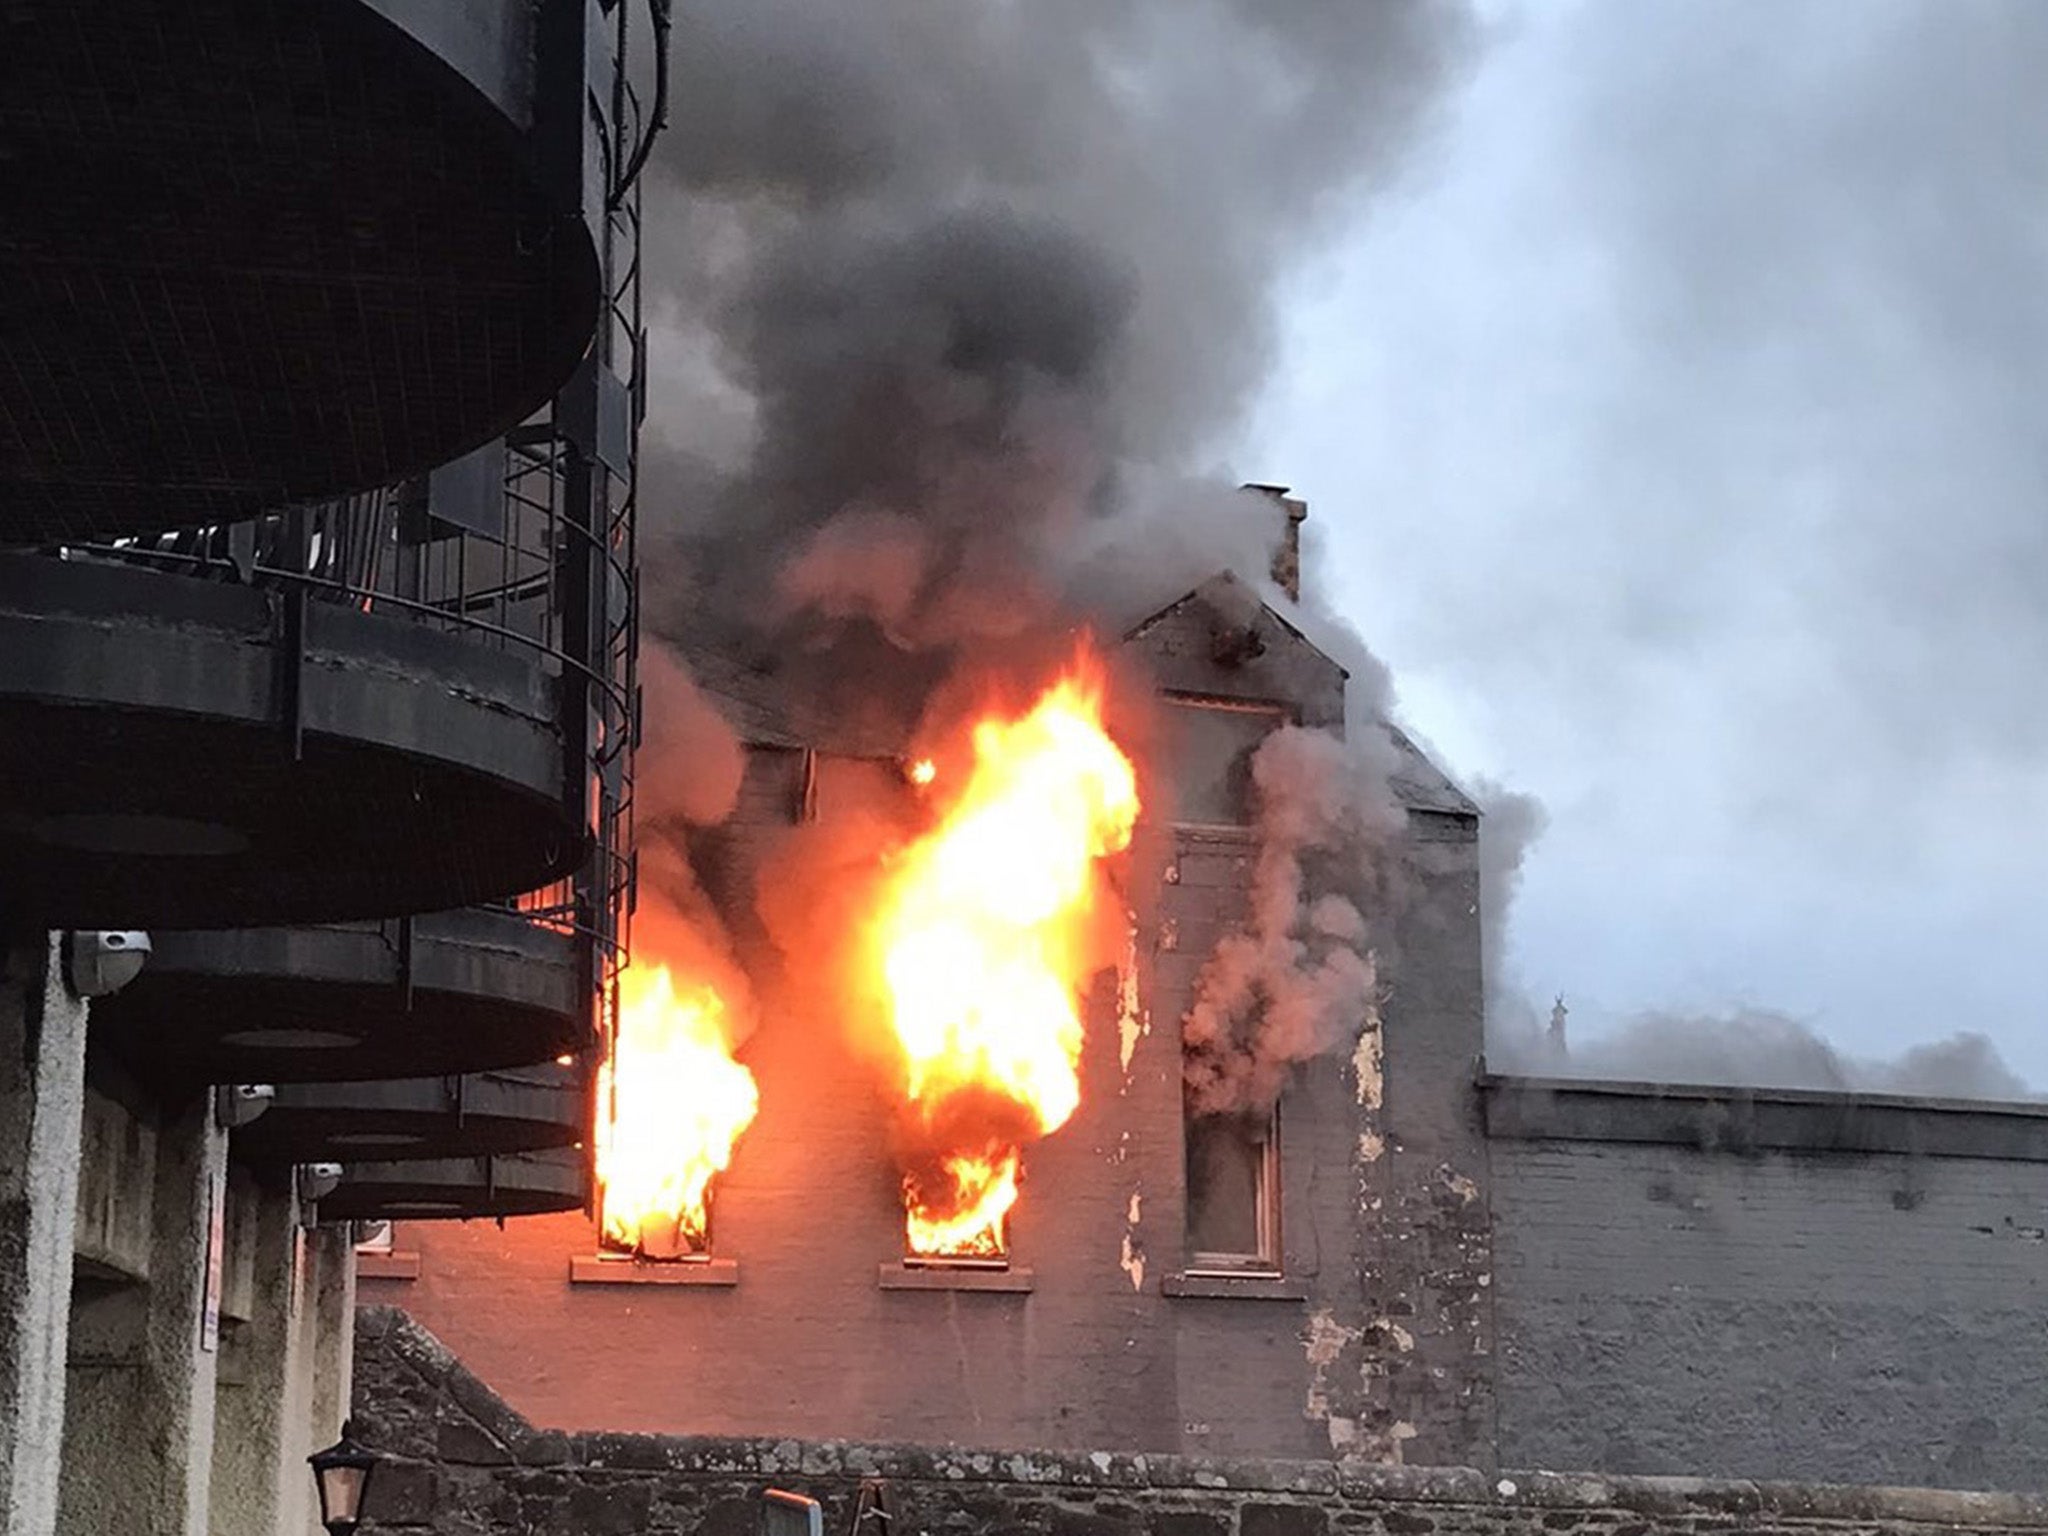 Fire crews were called to tackle the blaze at Nick’s on Henderson Street in Bridge of Allan, Scotland, on Saturday night